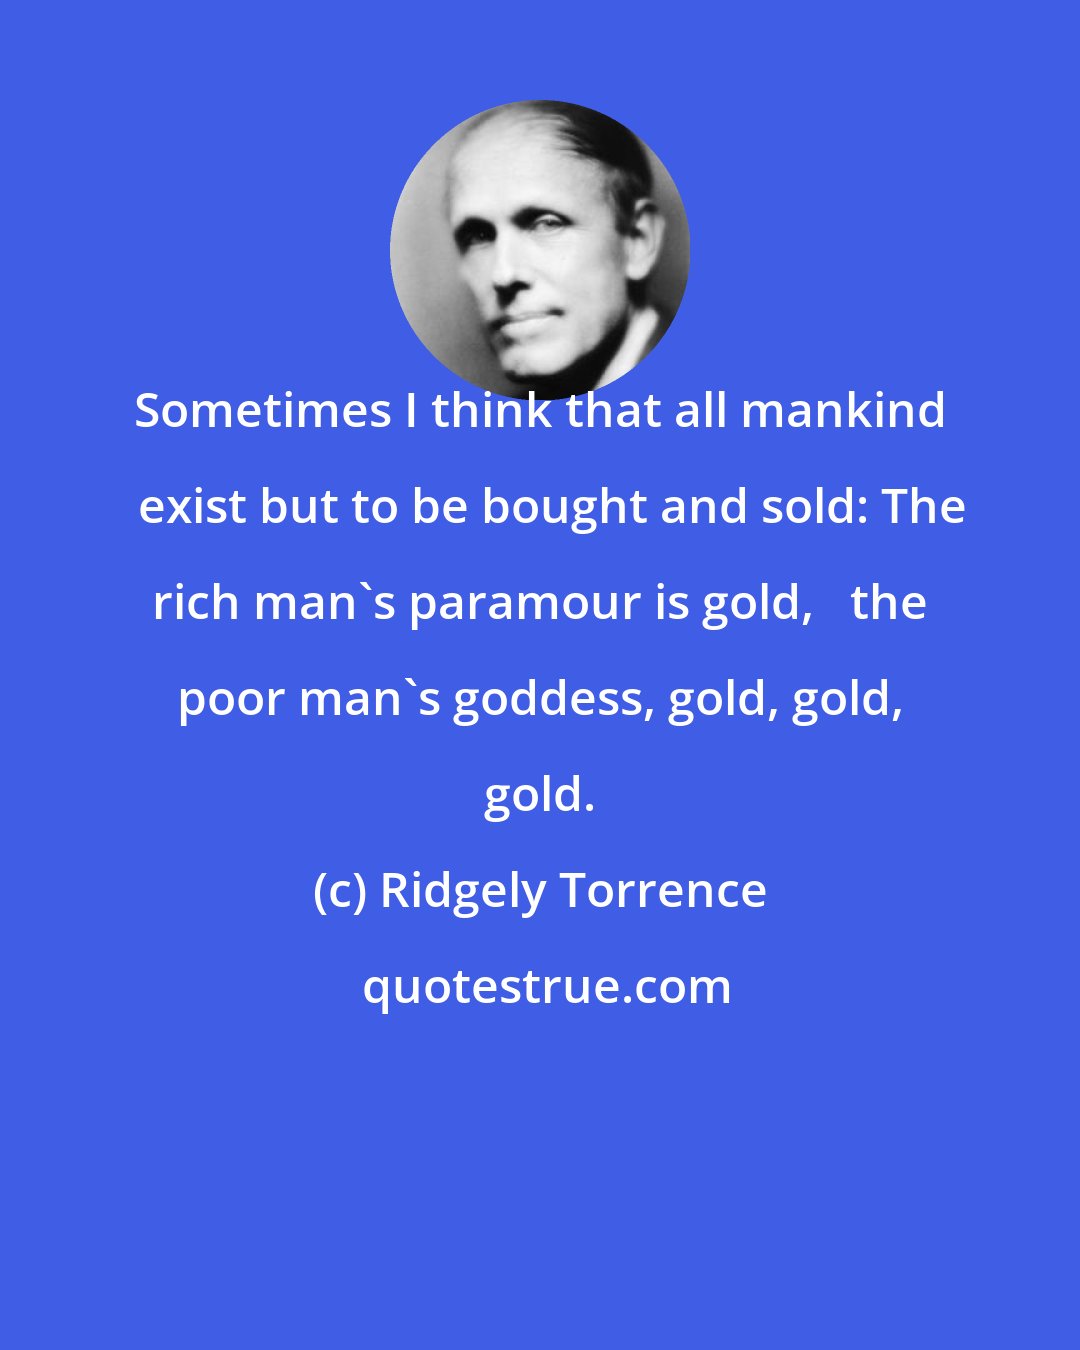 Ridgely Torrence: Sometimes I think that all mankind   exist but to be bought and sold: The rich man's paramour is gold,   the poor man's goddess, gold, gold, gold.